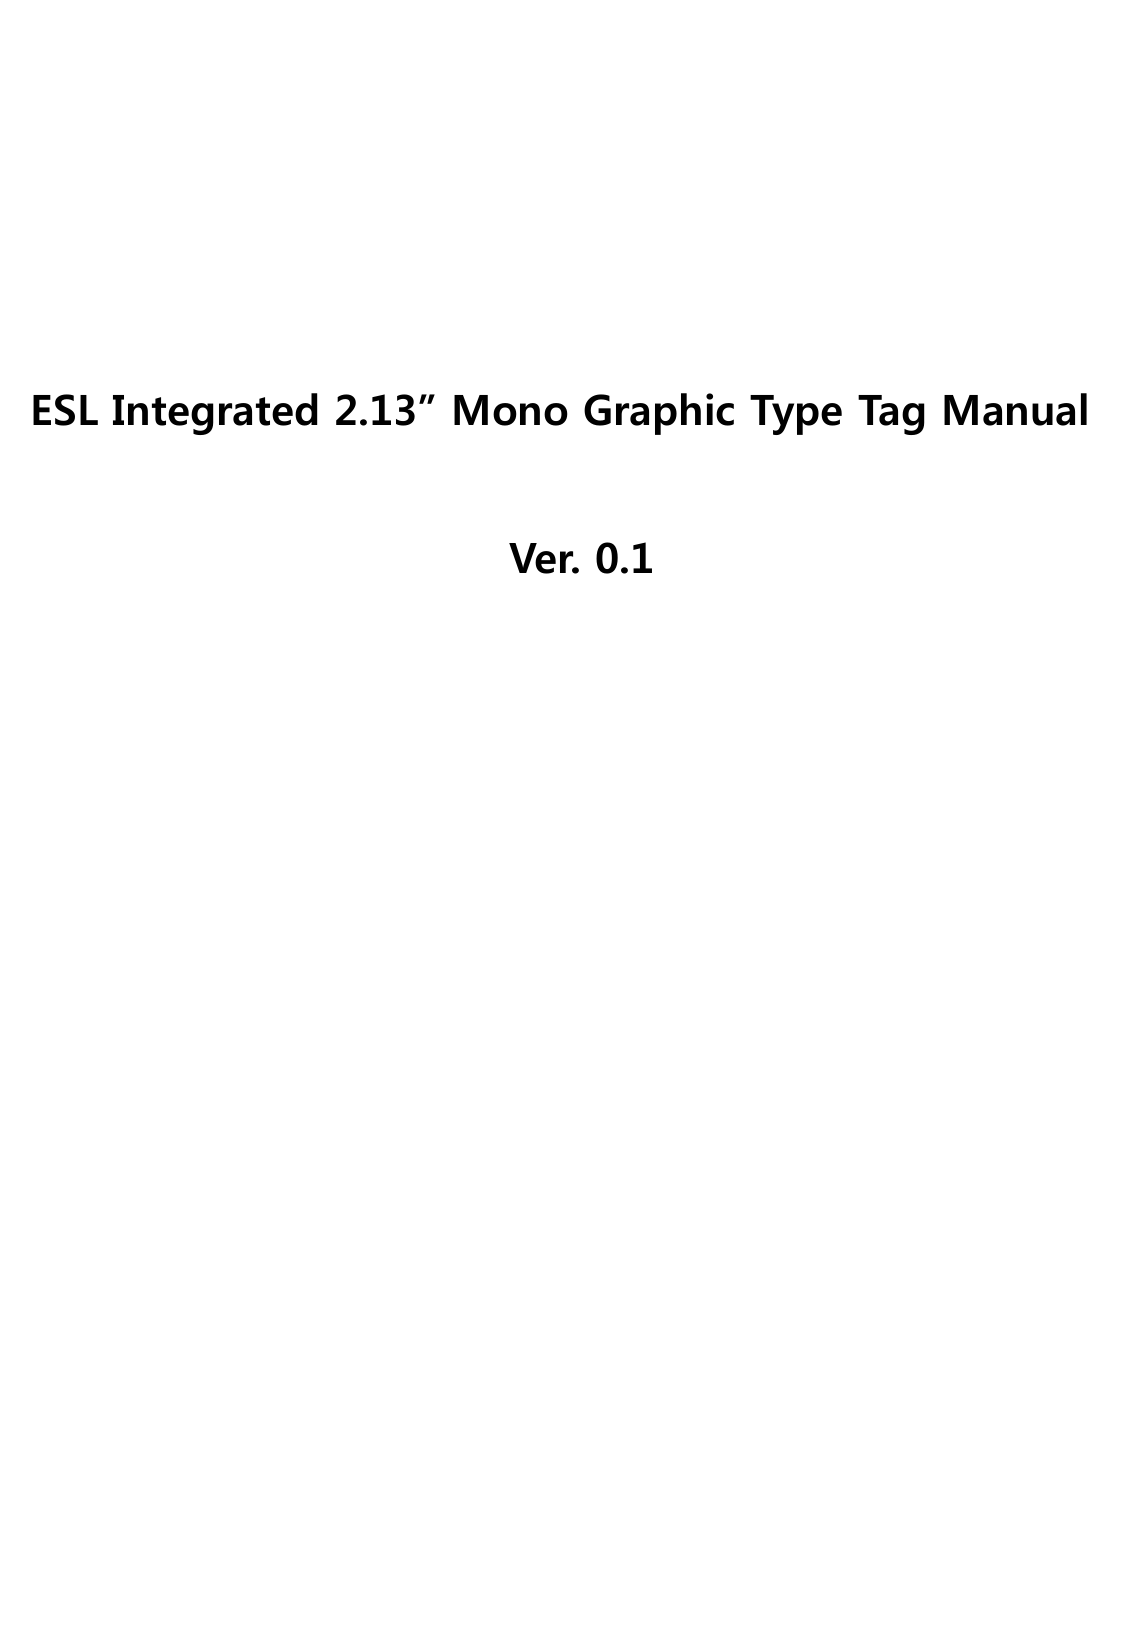 ESL Integrated 2.13” Mono Graphic Type Tag Manual Ver. 0.1 